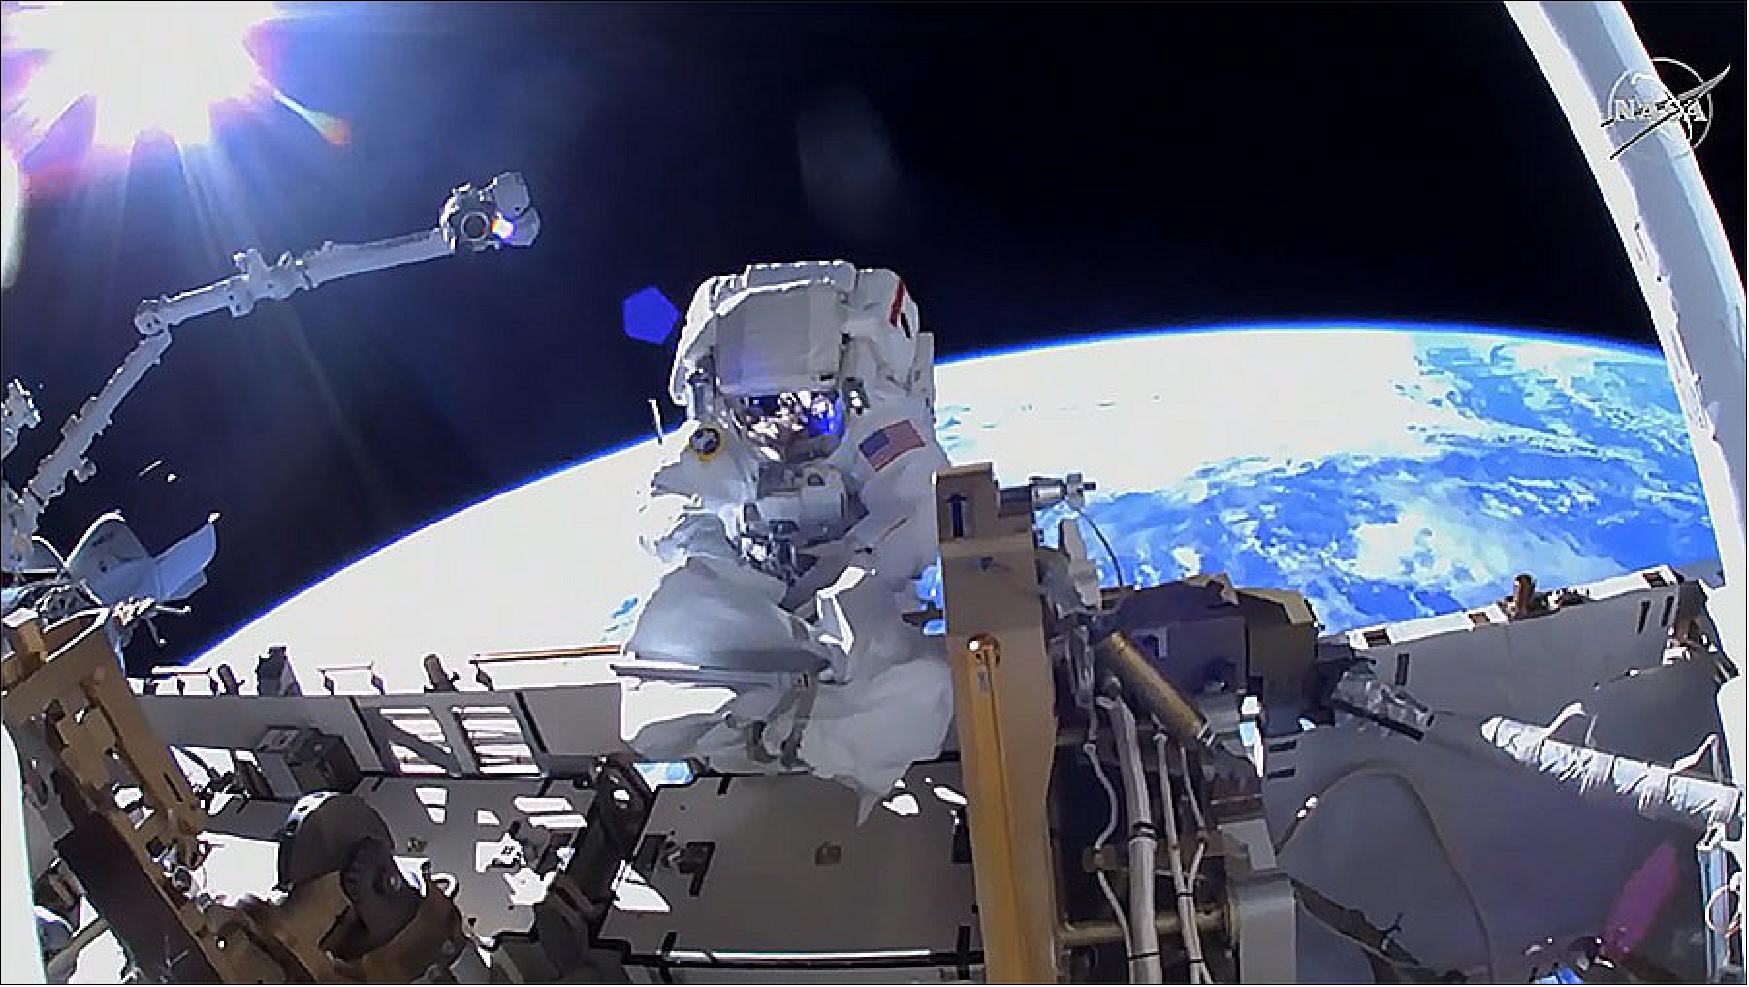 Figure 14: NASA astronaut Kayla Barron works to ready the space station for a third set of roll-out solar arrays about 260 miles above the Earth (image credit: NASA TV)